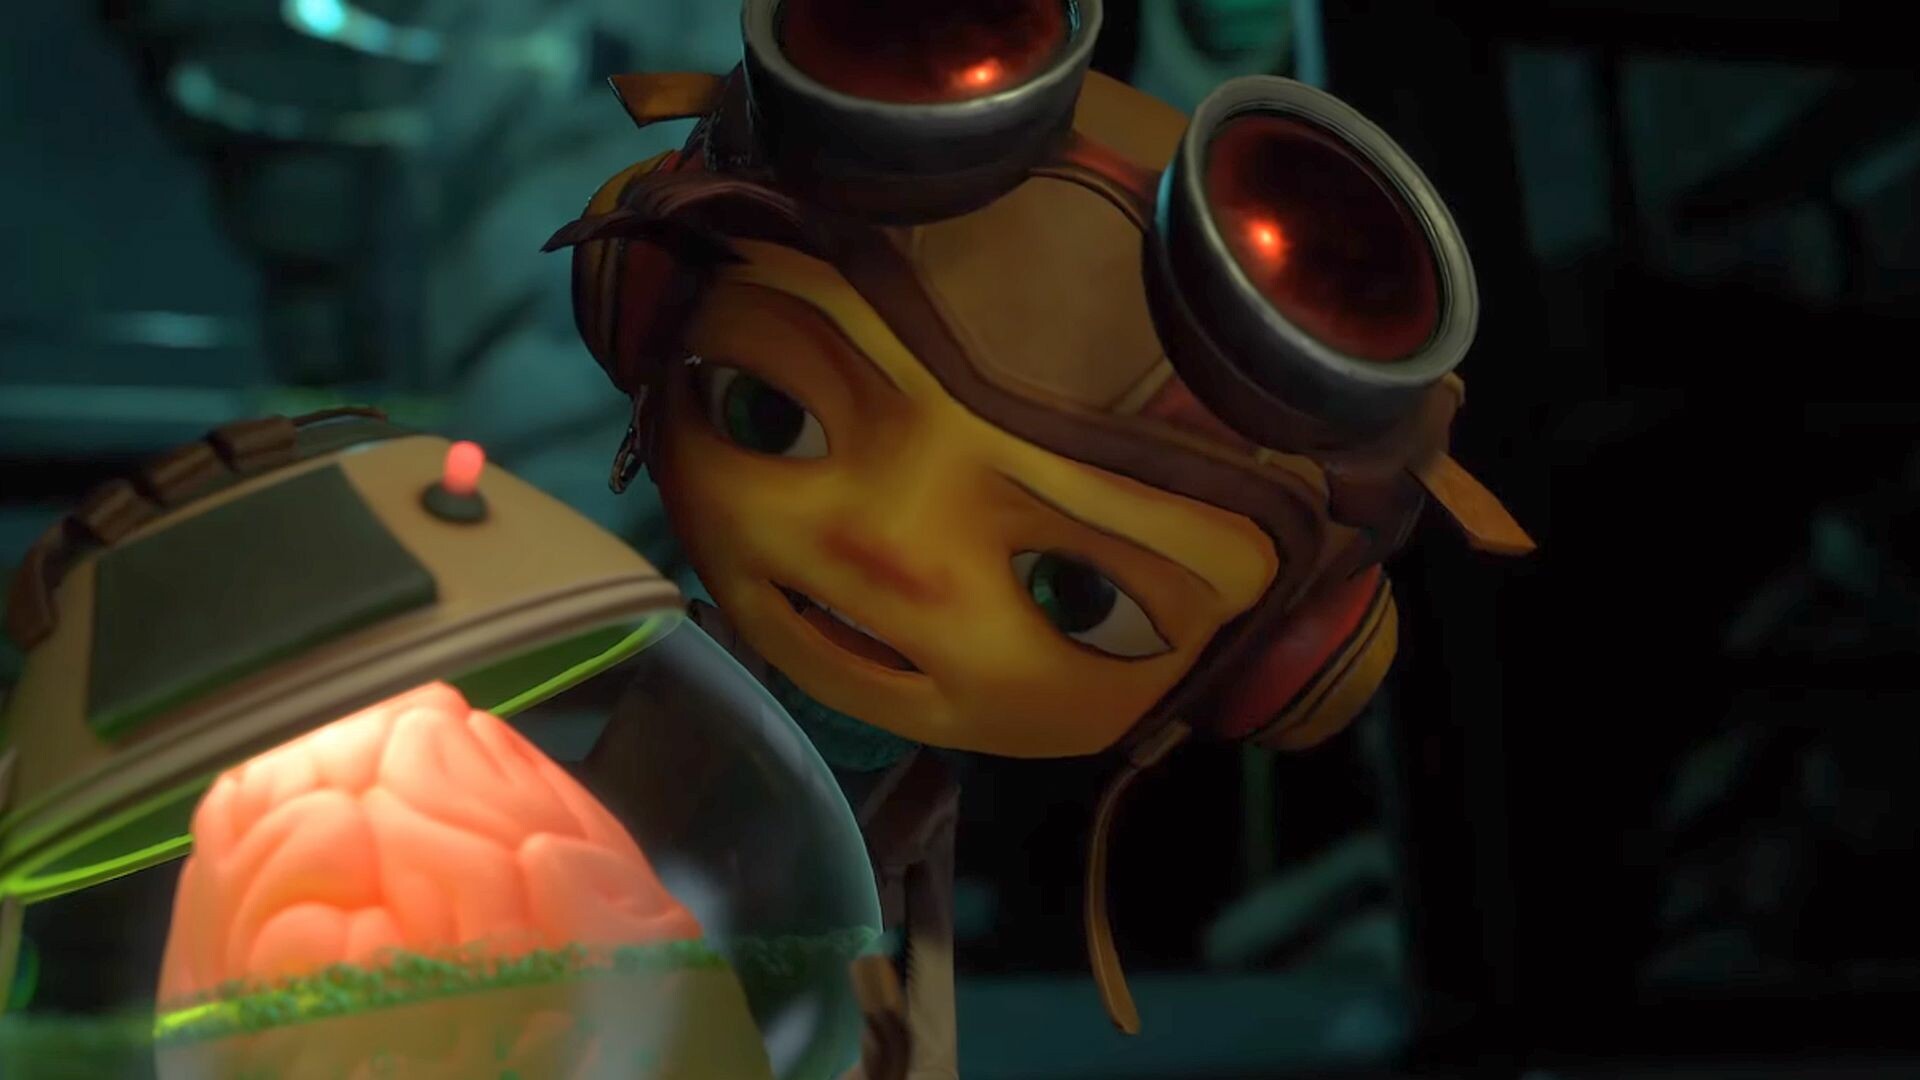 Psychonauts 2: Raz, A young acrobat that is training to become a Psychonaut. 1920x1080 Full HD Wallpaper.